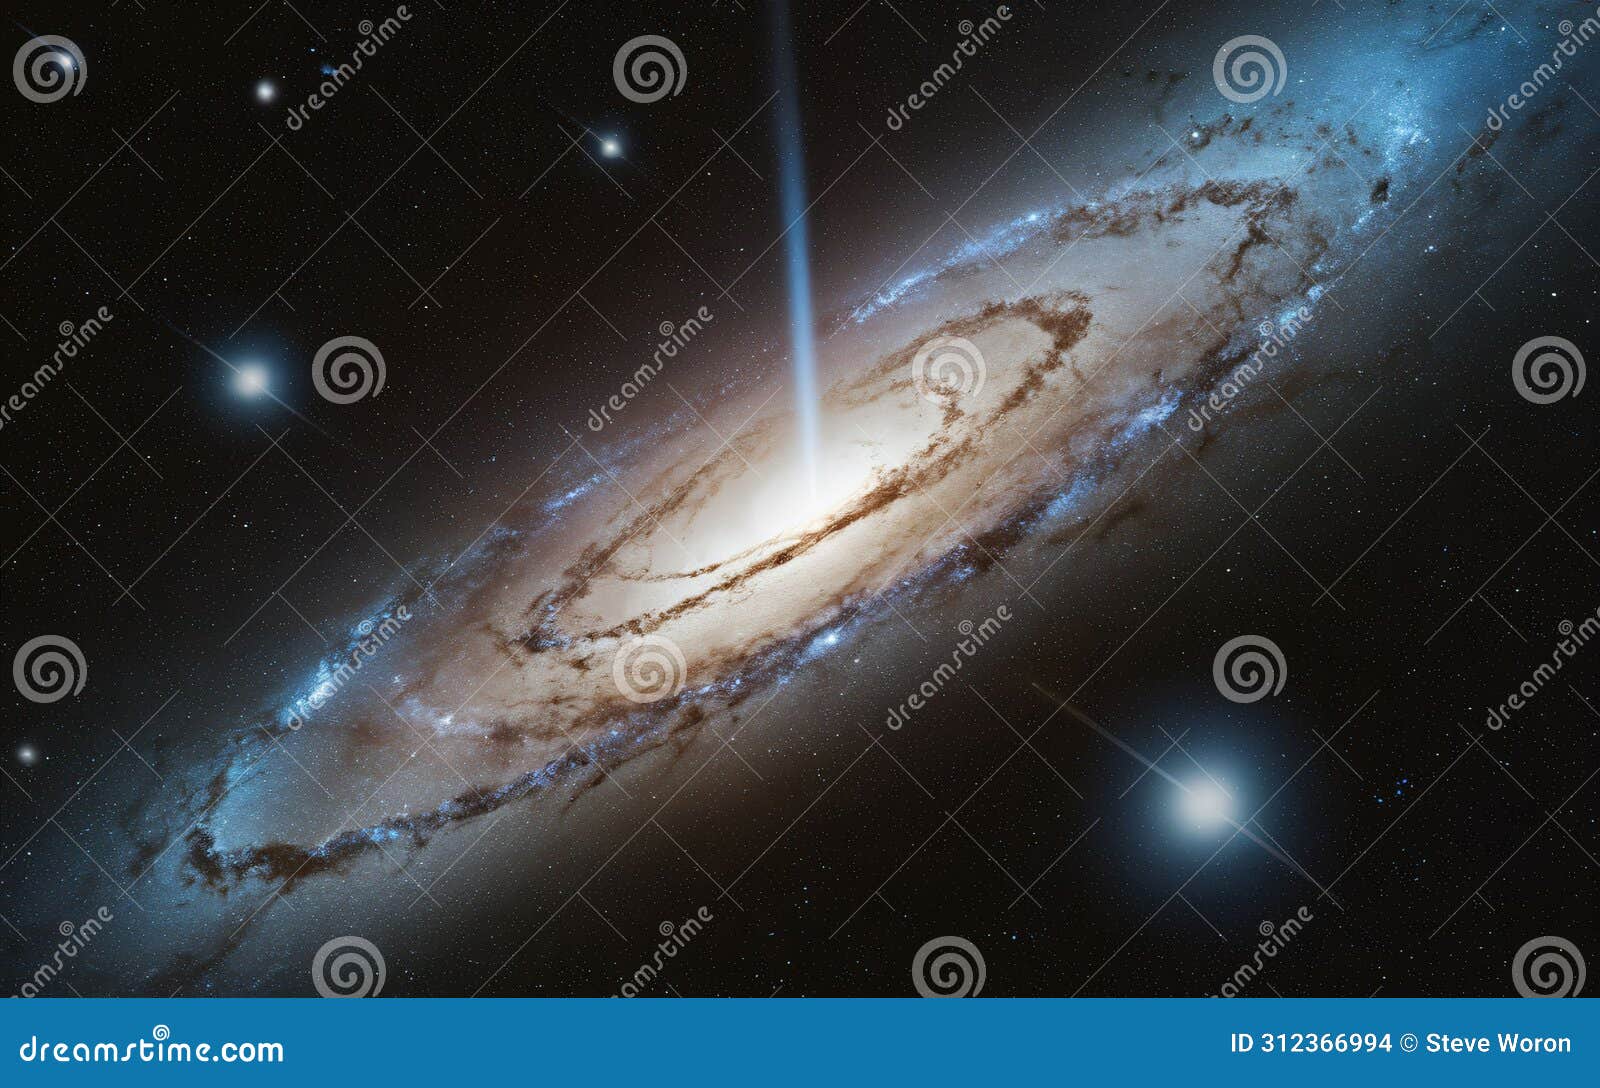 a stunning spiral galaxy drifting through intergalactic out space